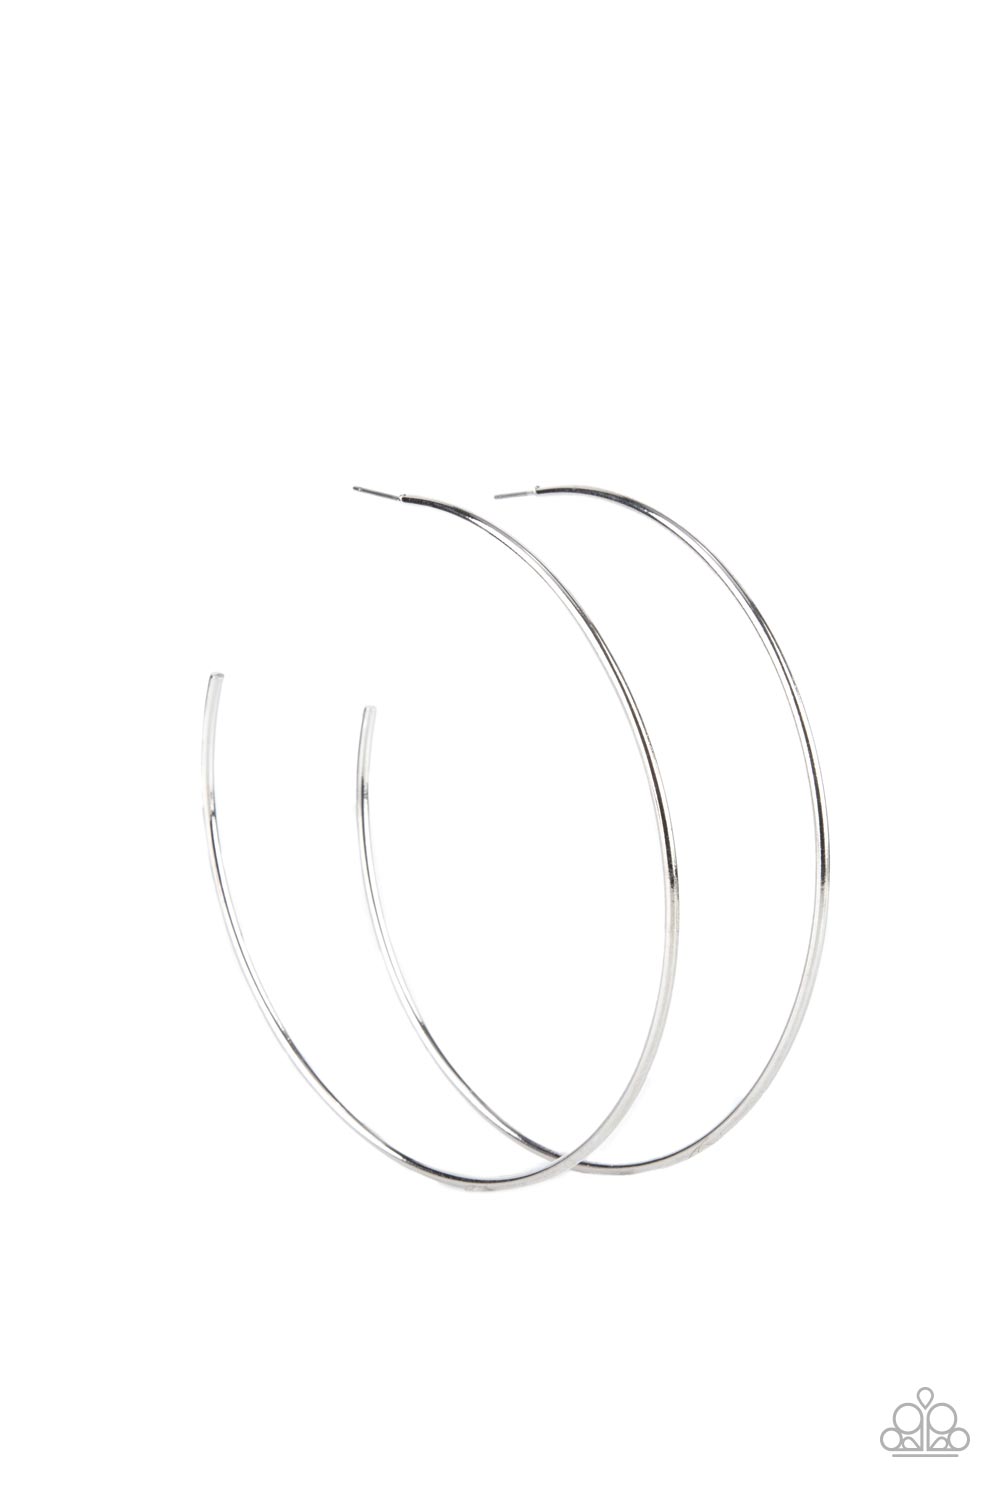 Colossal Couture - Silver Hoop Earrings - Paparazzi Accessories - A classic silver bar curls into an outrageously oversized hoop for a trendsetting look. Earring attaches to a standard post fitting. Hoop measures approximately 4" in diameter. Sold as one pair of hoop earrings.